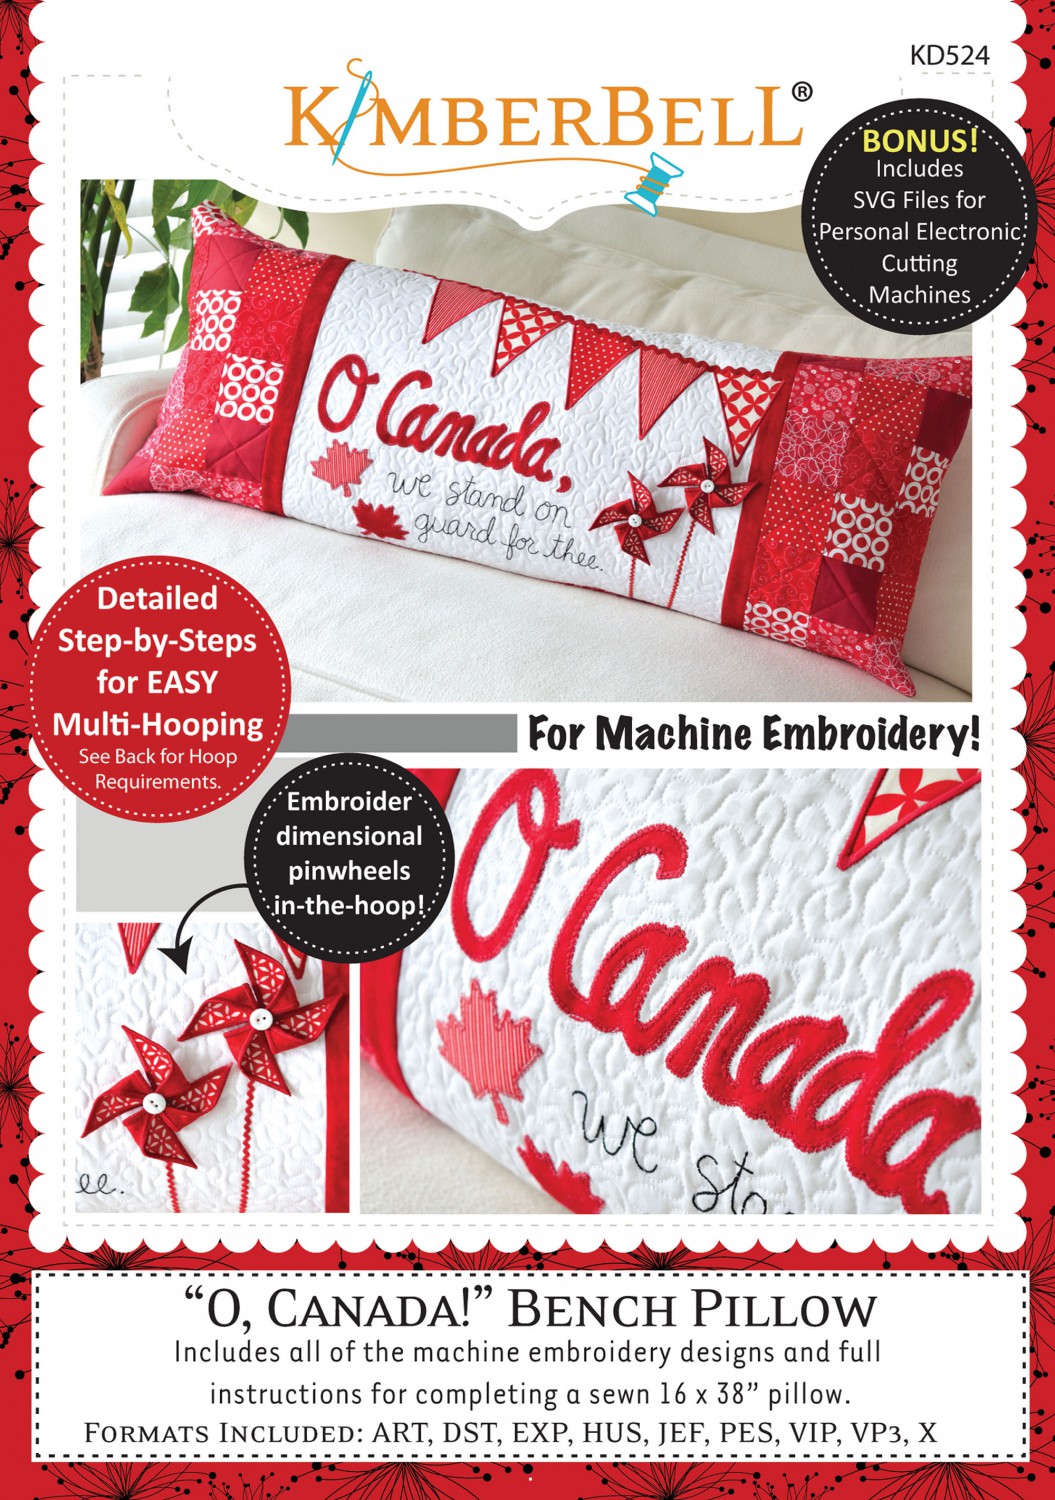 O'Canada! Bench Pillow - Machine Embroidery CD